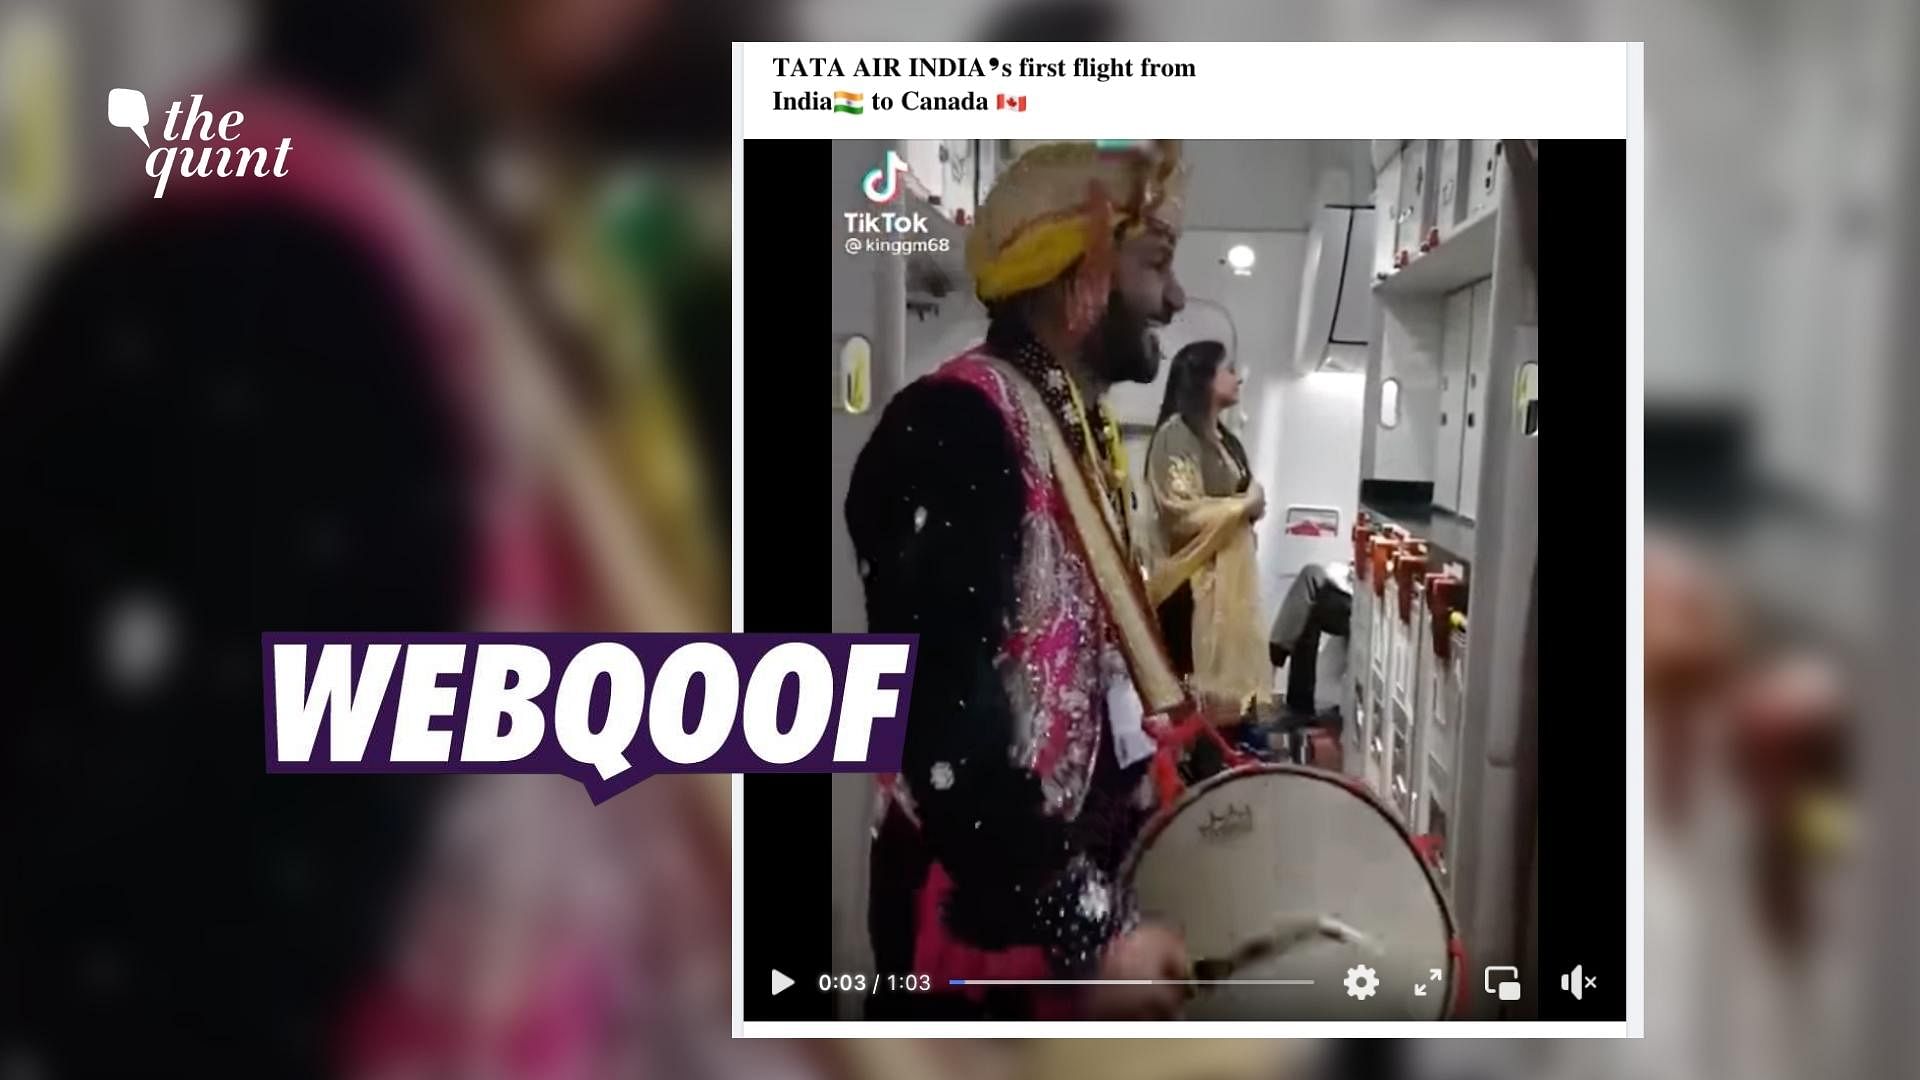 <div class="paragraphs"><p>The claim states that Bhangra was performed inside an Air India India to Canada flight.&nbsp;</p></div>